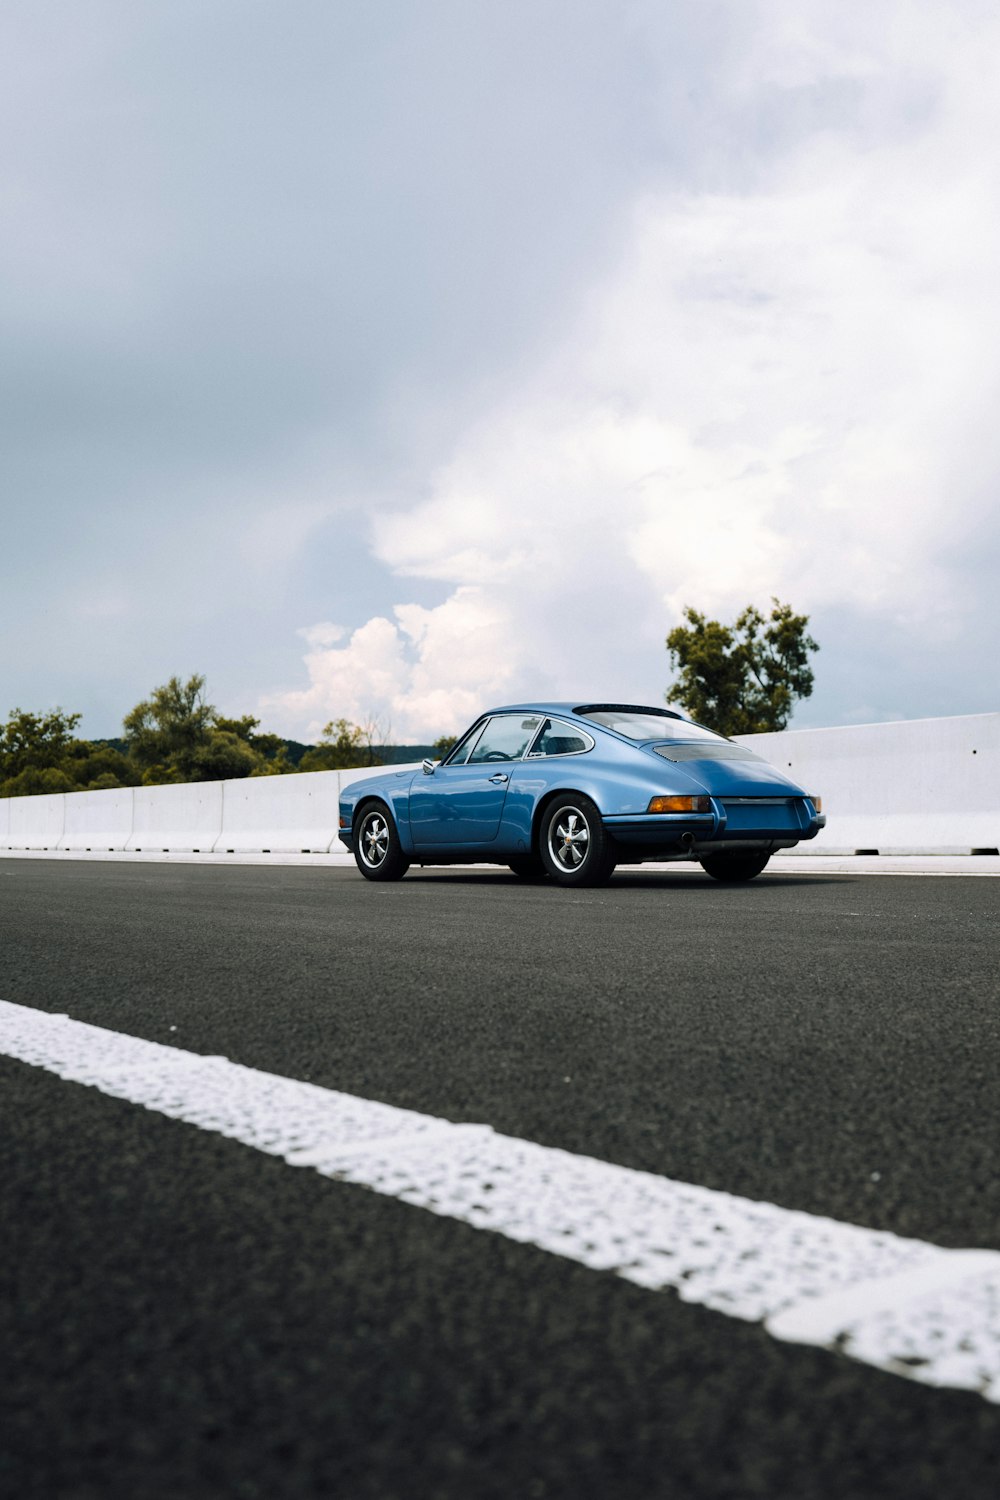 blue coupe on gray asphalt road under white cloudy sky during daytime